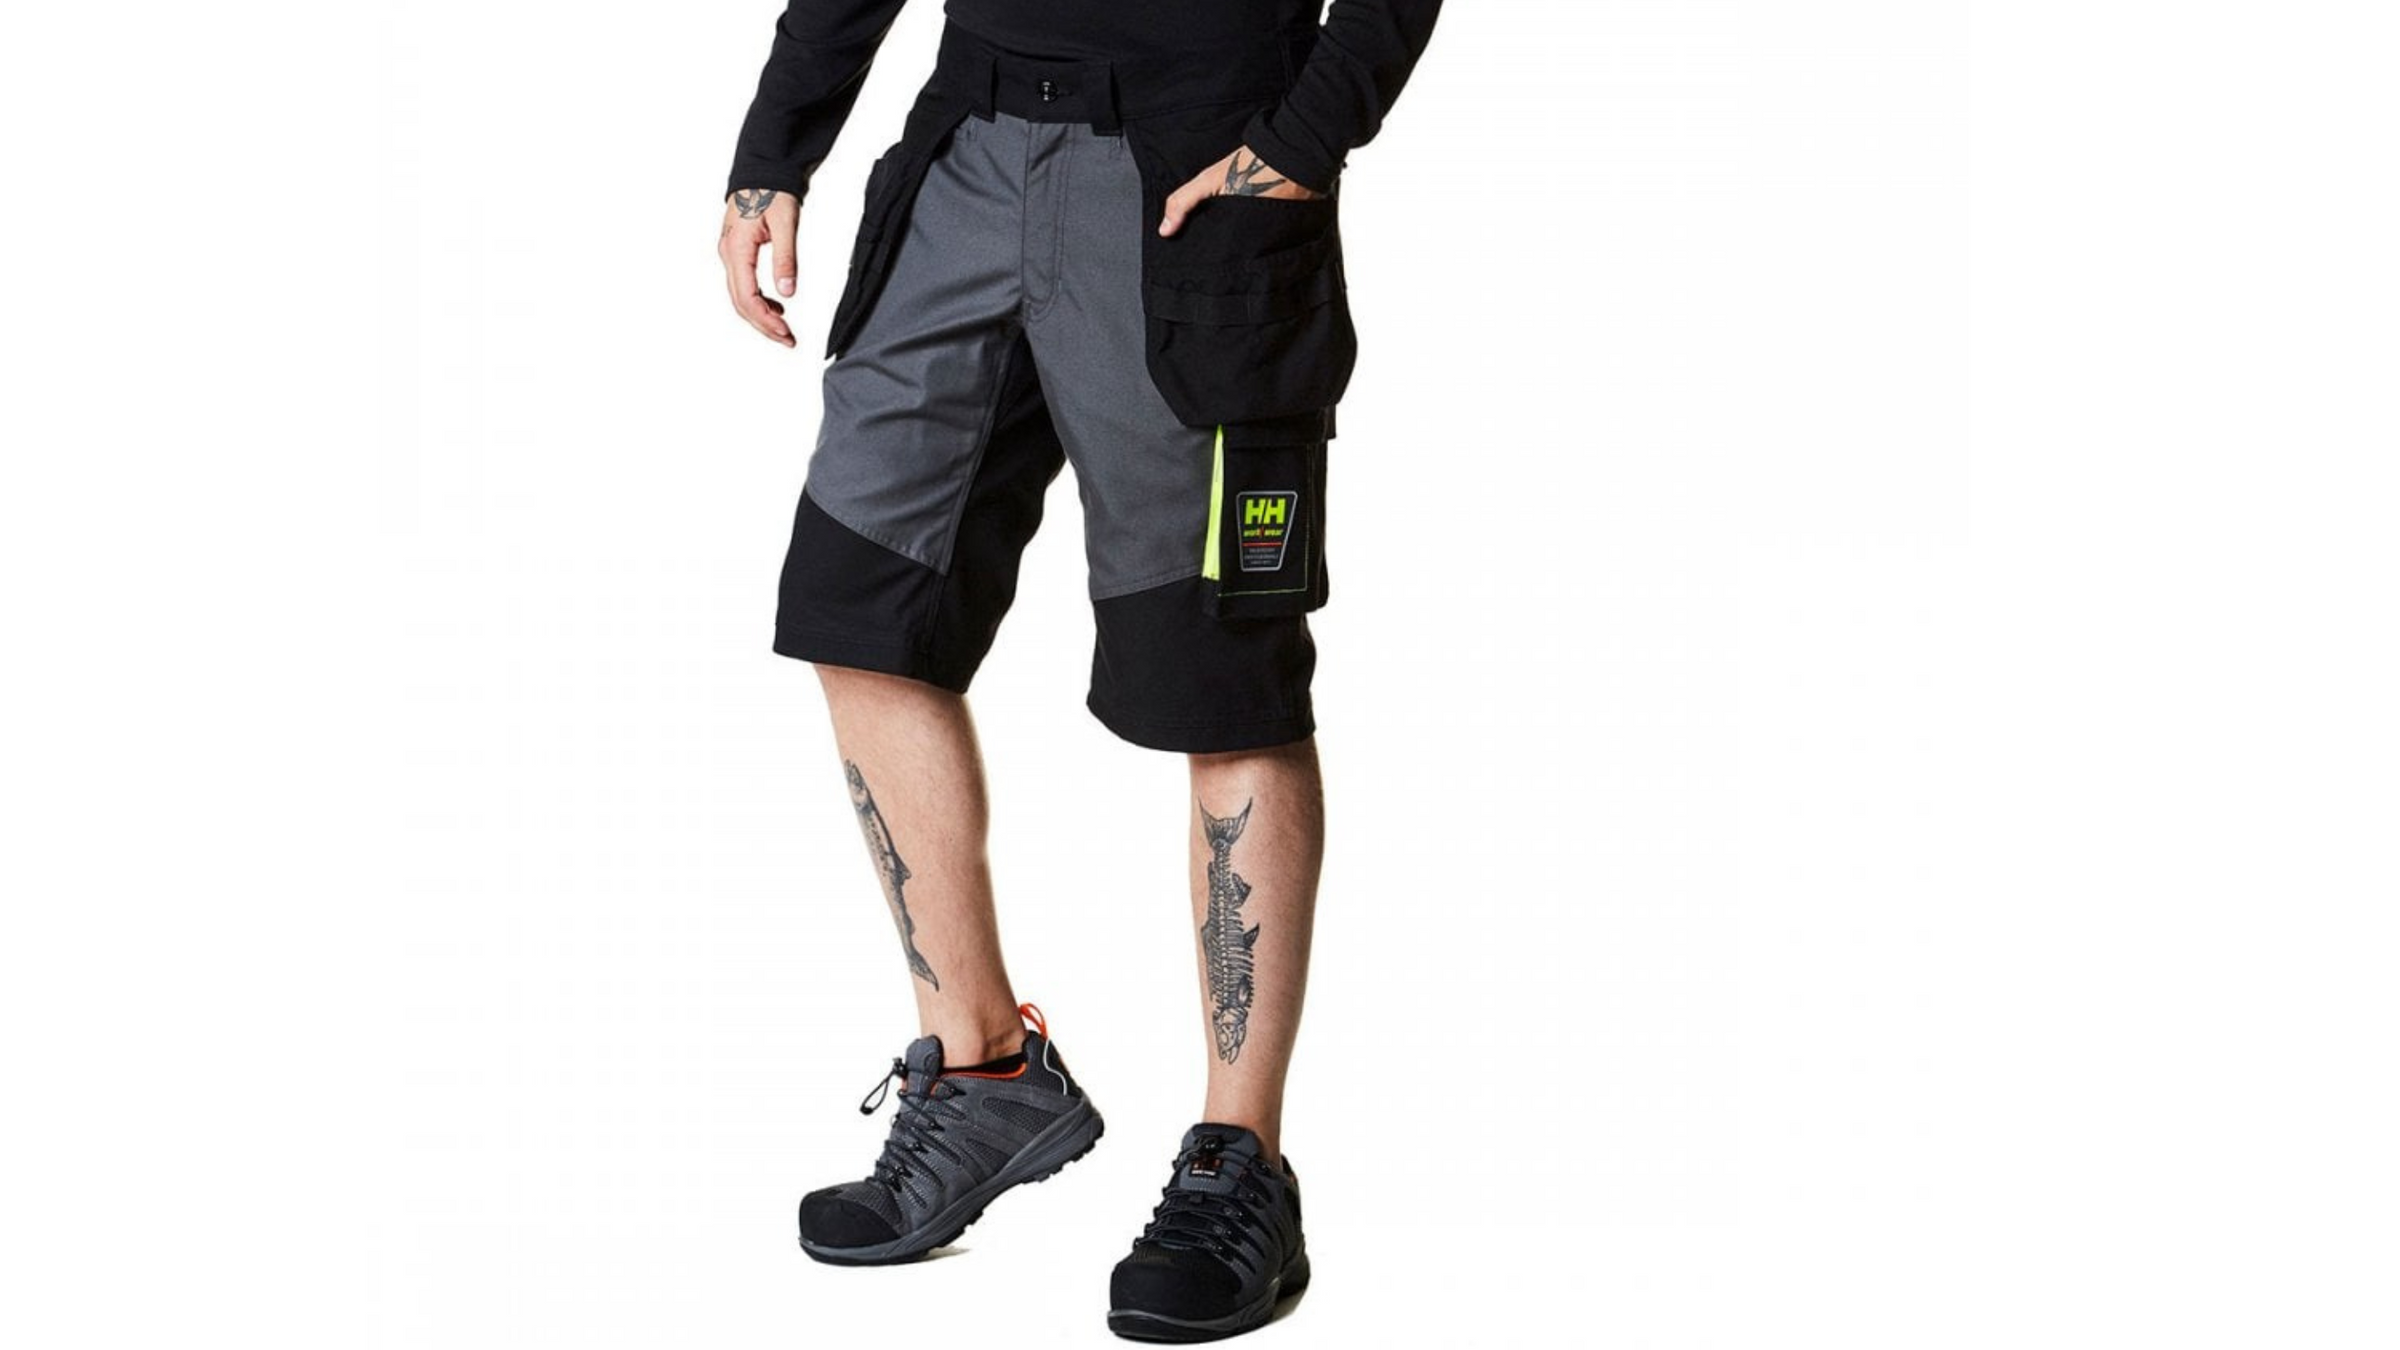 An image of Helly Hansen Shorts being worn